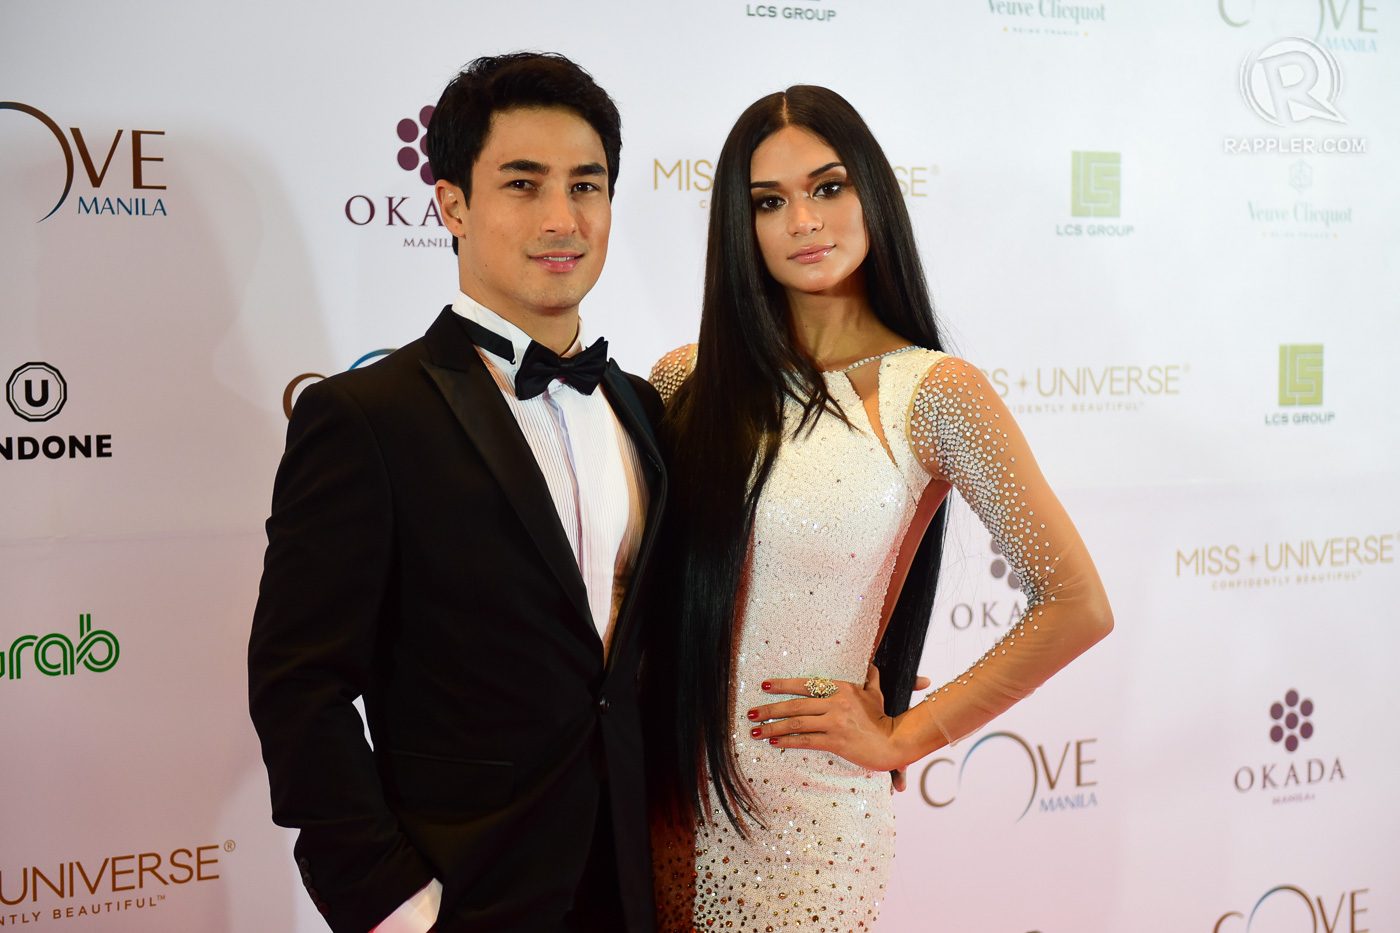 Pia Wurtzbach on breakup with Marlon Stockinger: I wish him and his family well